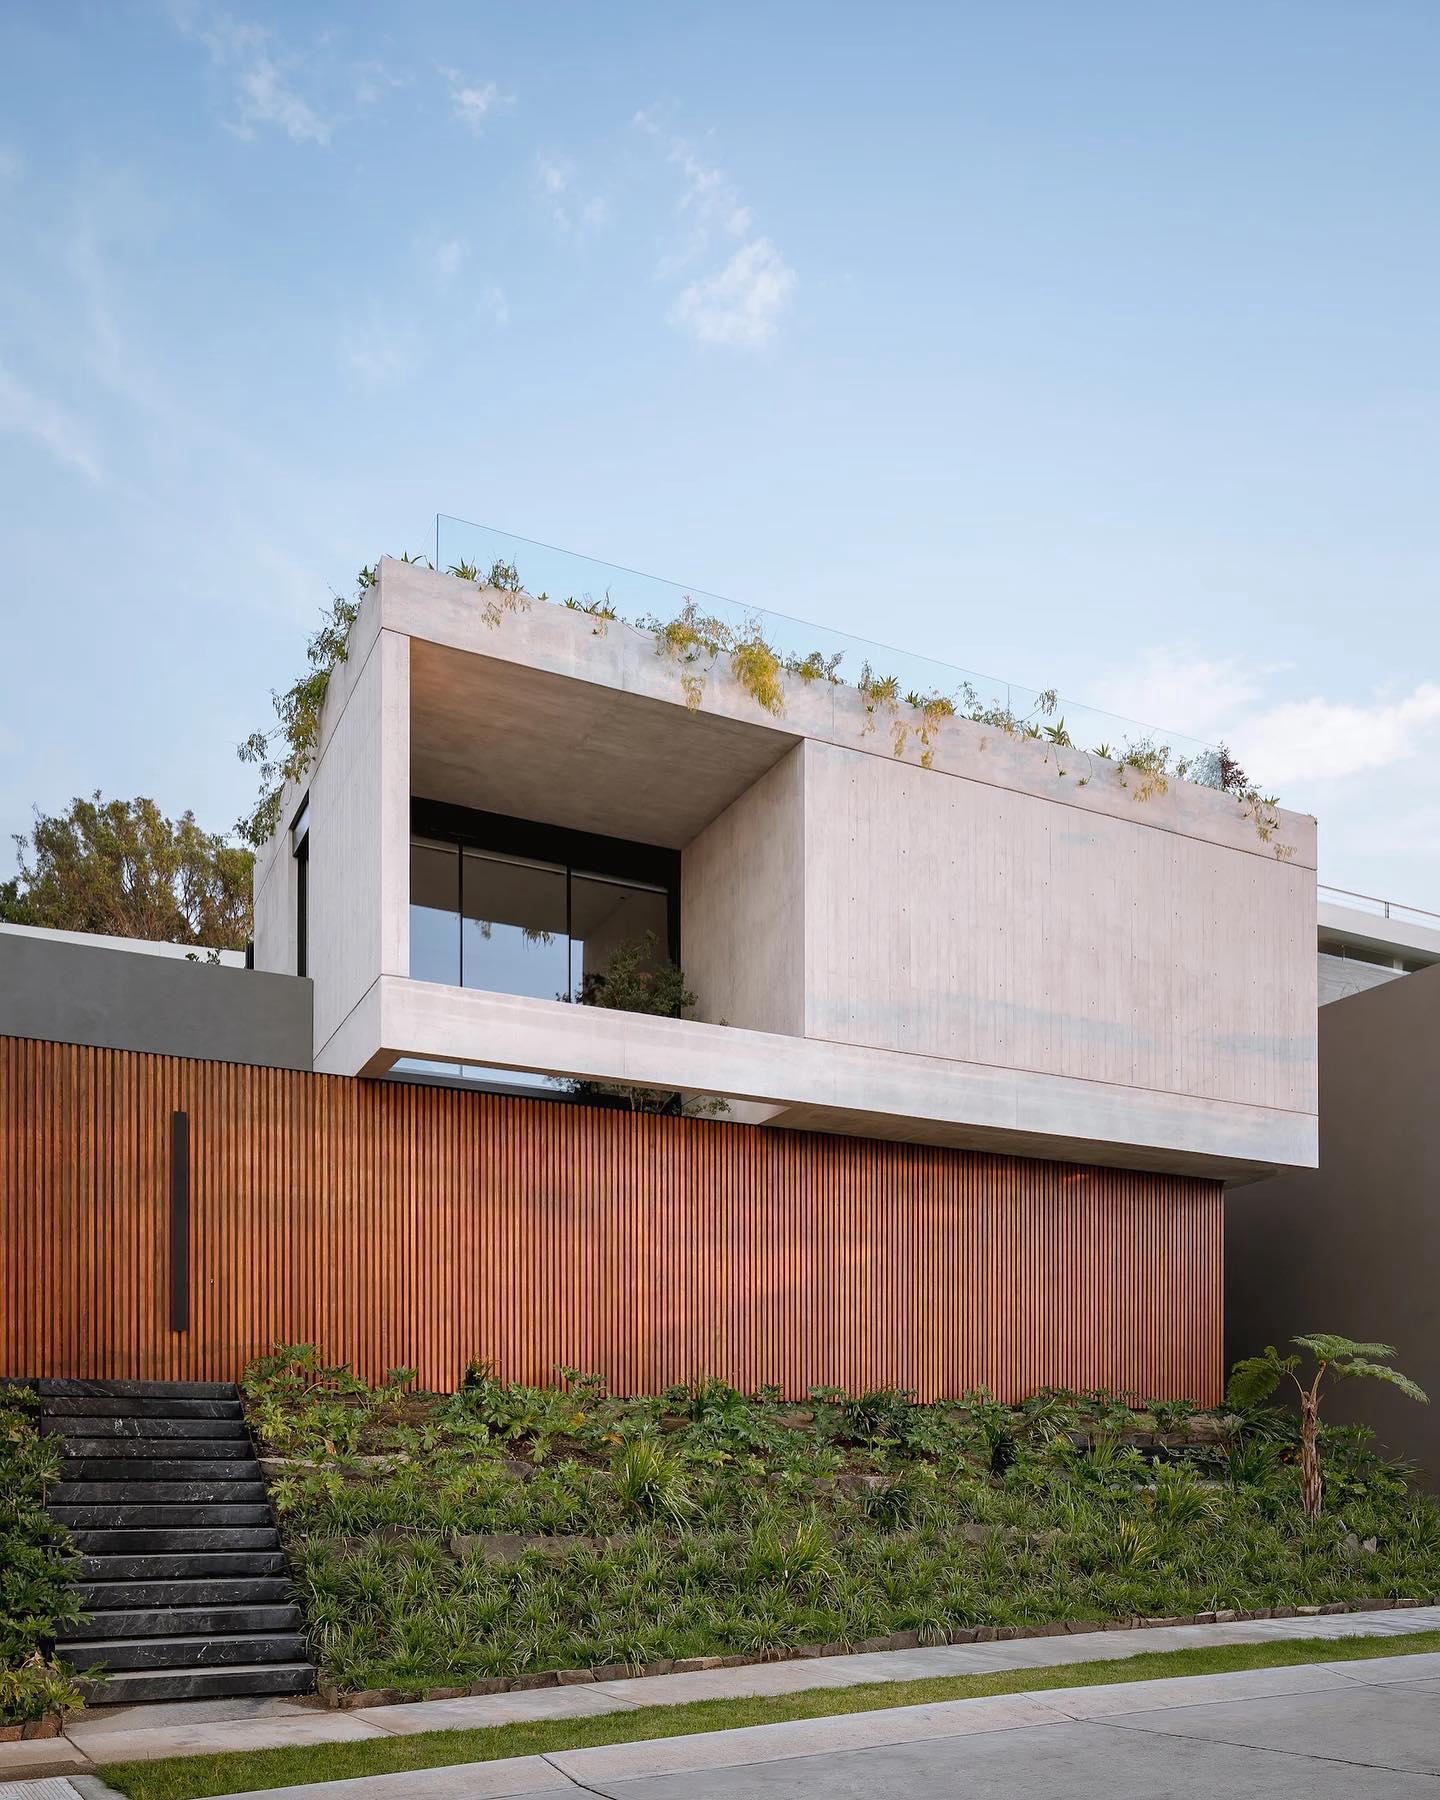 image  1 “The design of GDL 3 House located in Zapopan, Mexico, became a challenge due to the many restrictio